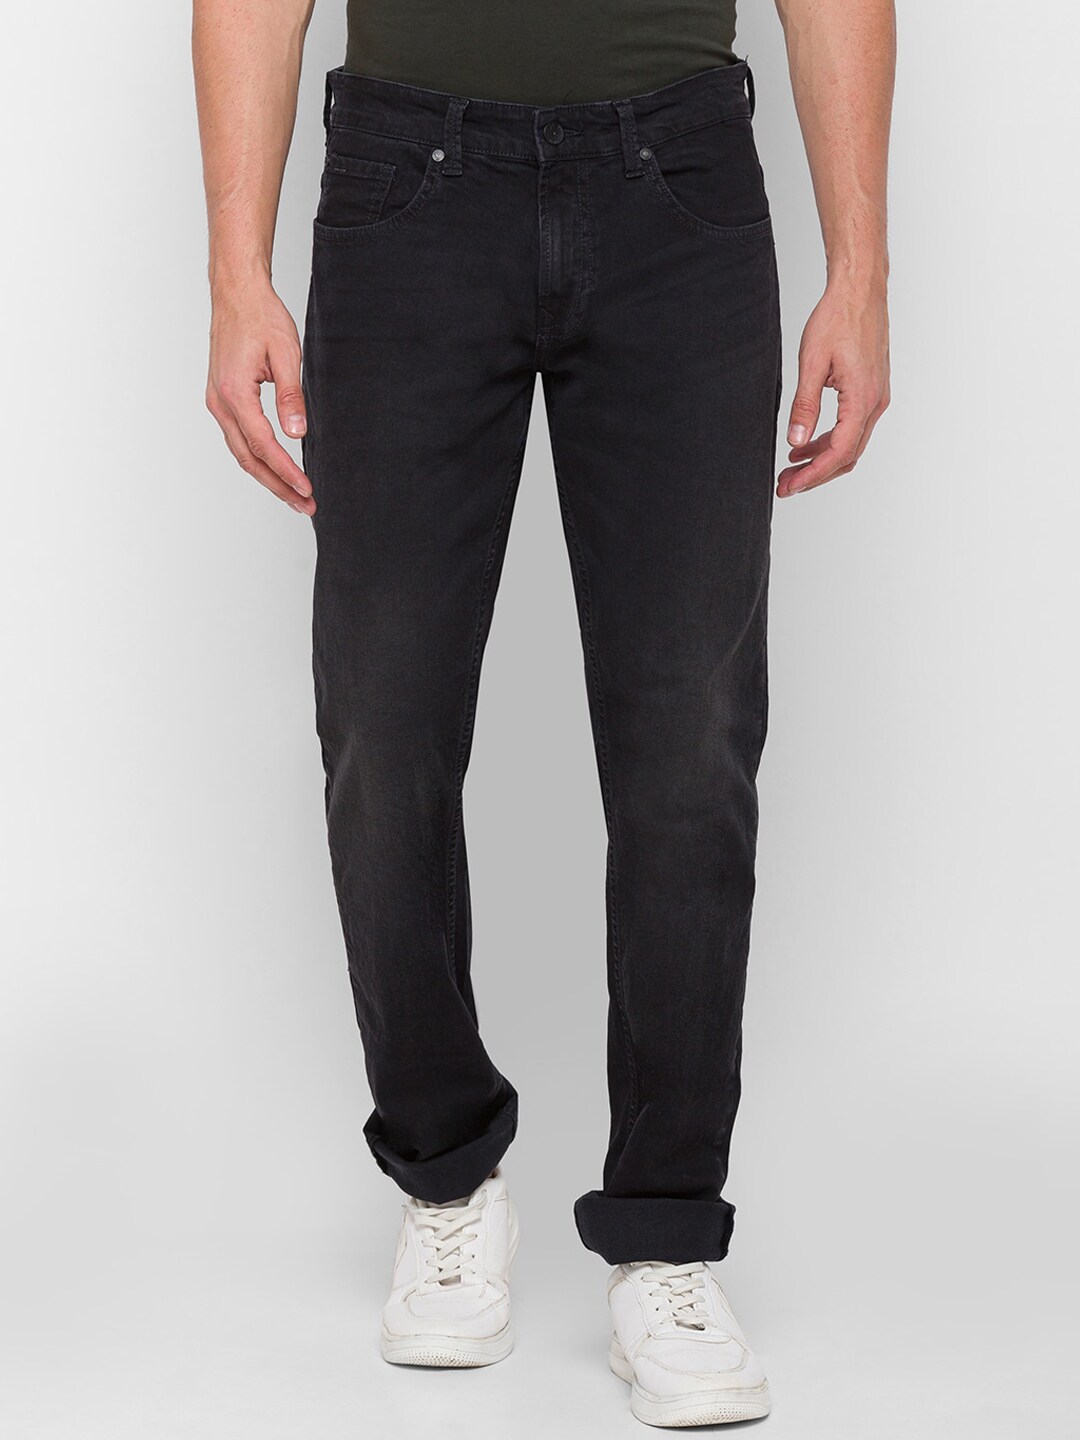 SPYKAR Men Black Relaxed Fit No Fade Cotton Jeans